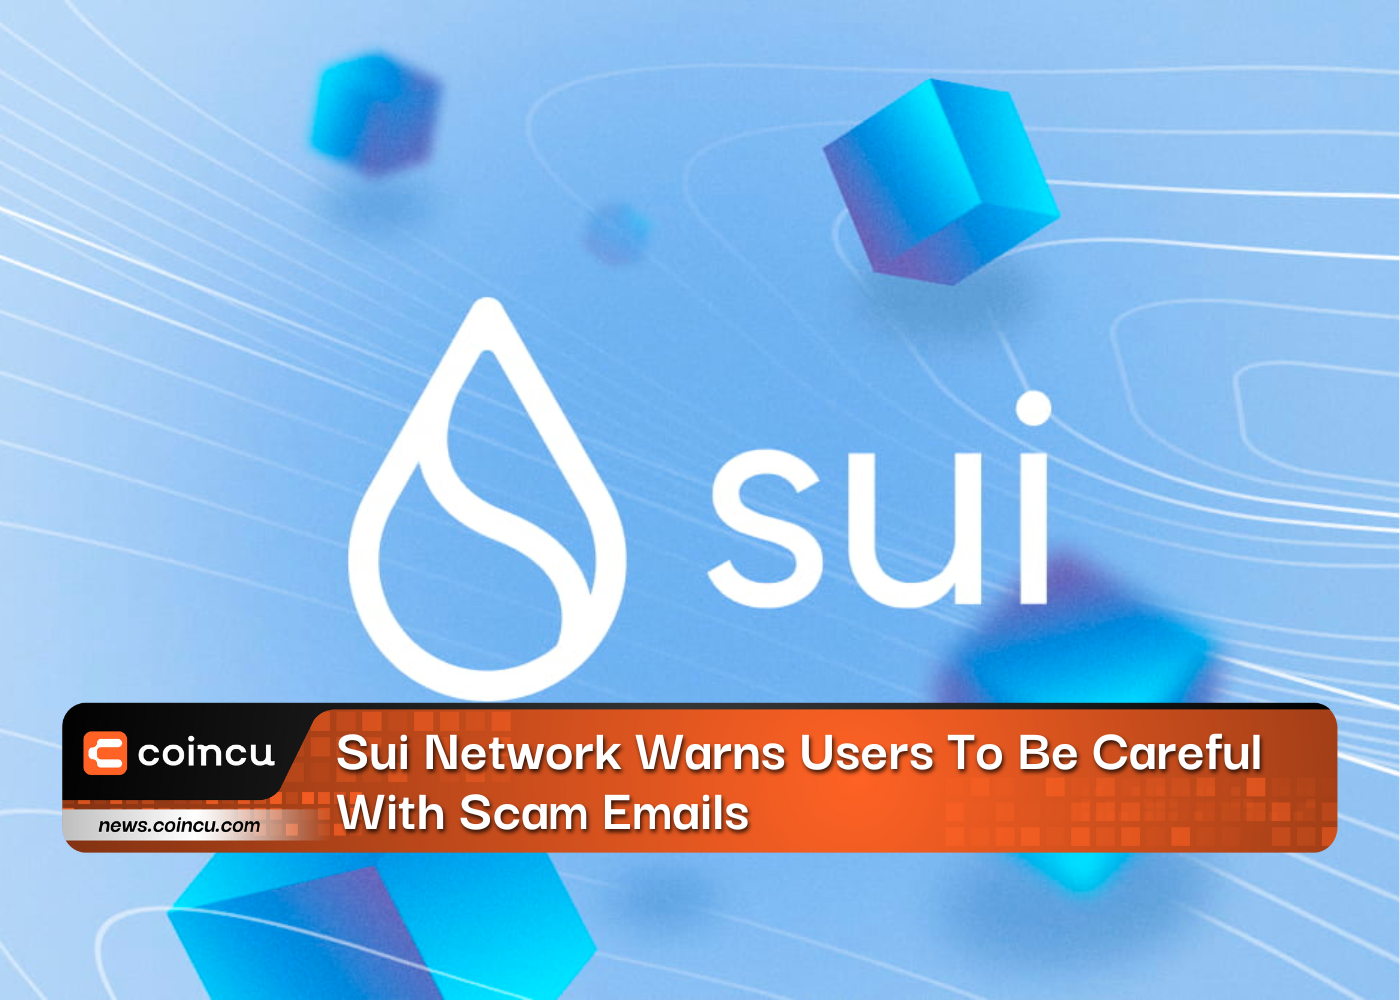 Sui Network Warns Users To Be Careful With Scam Emails